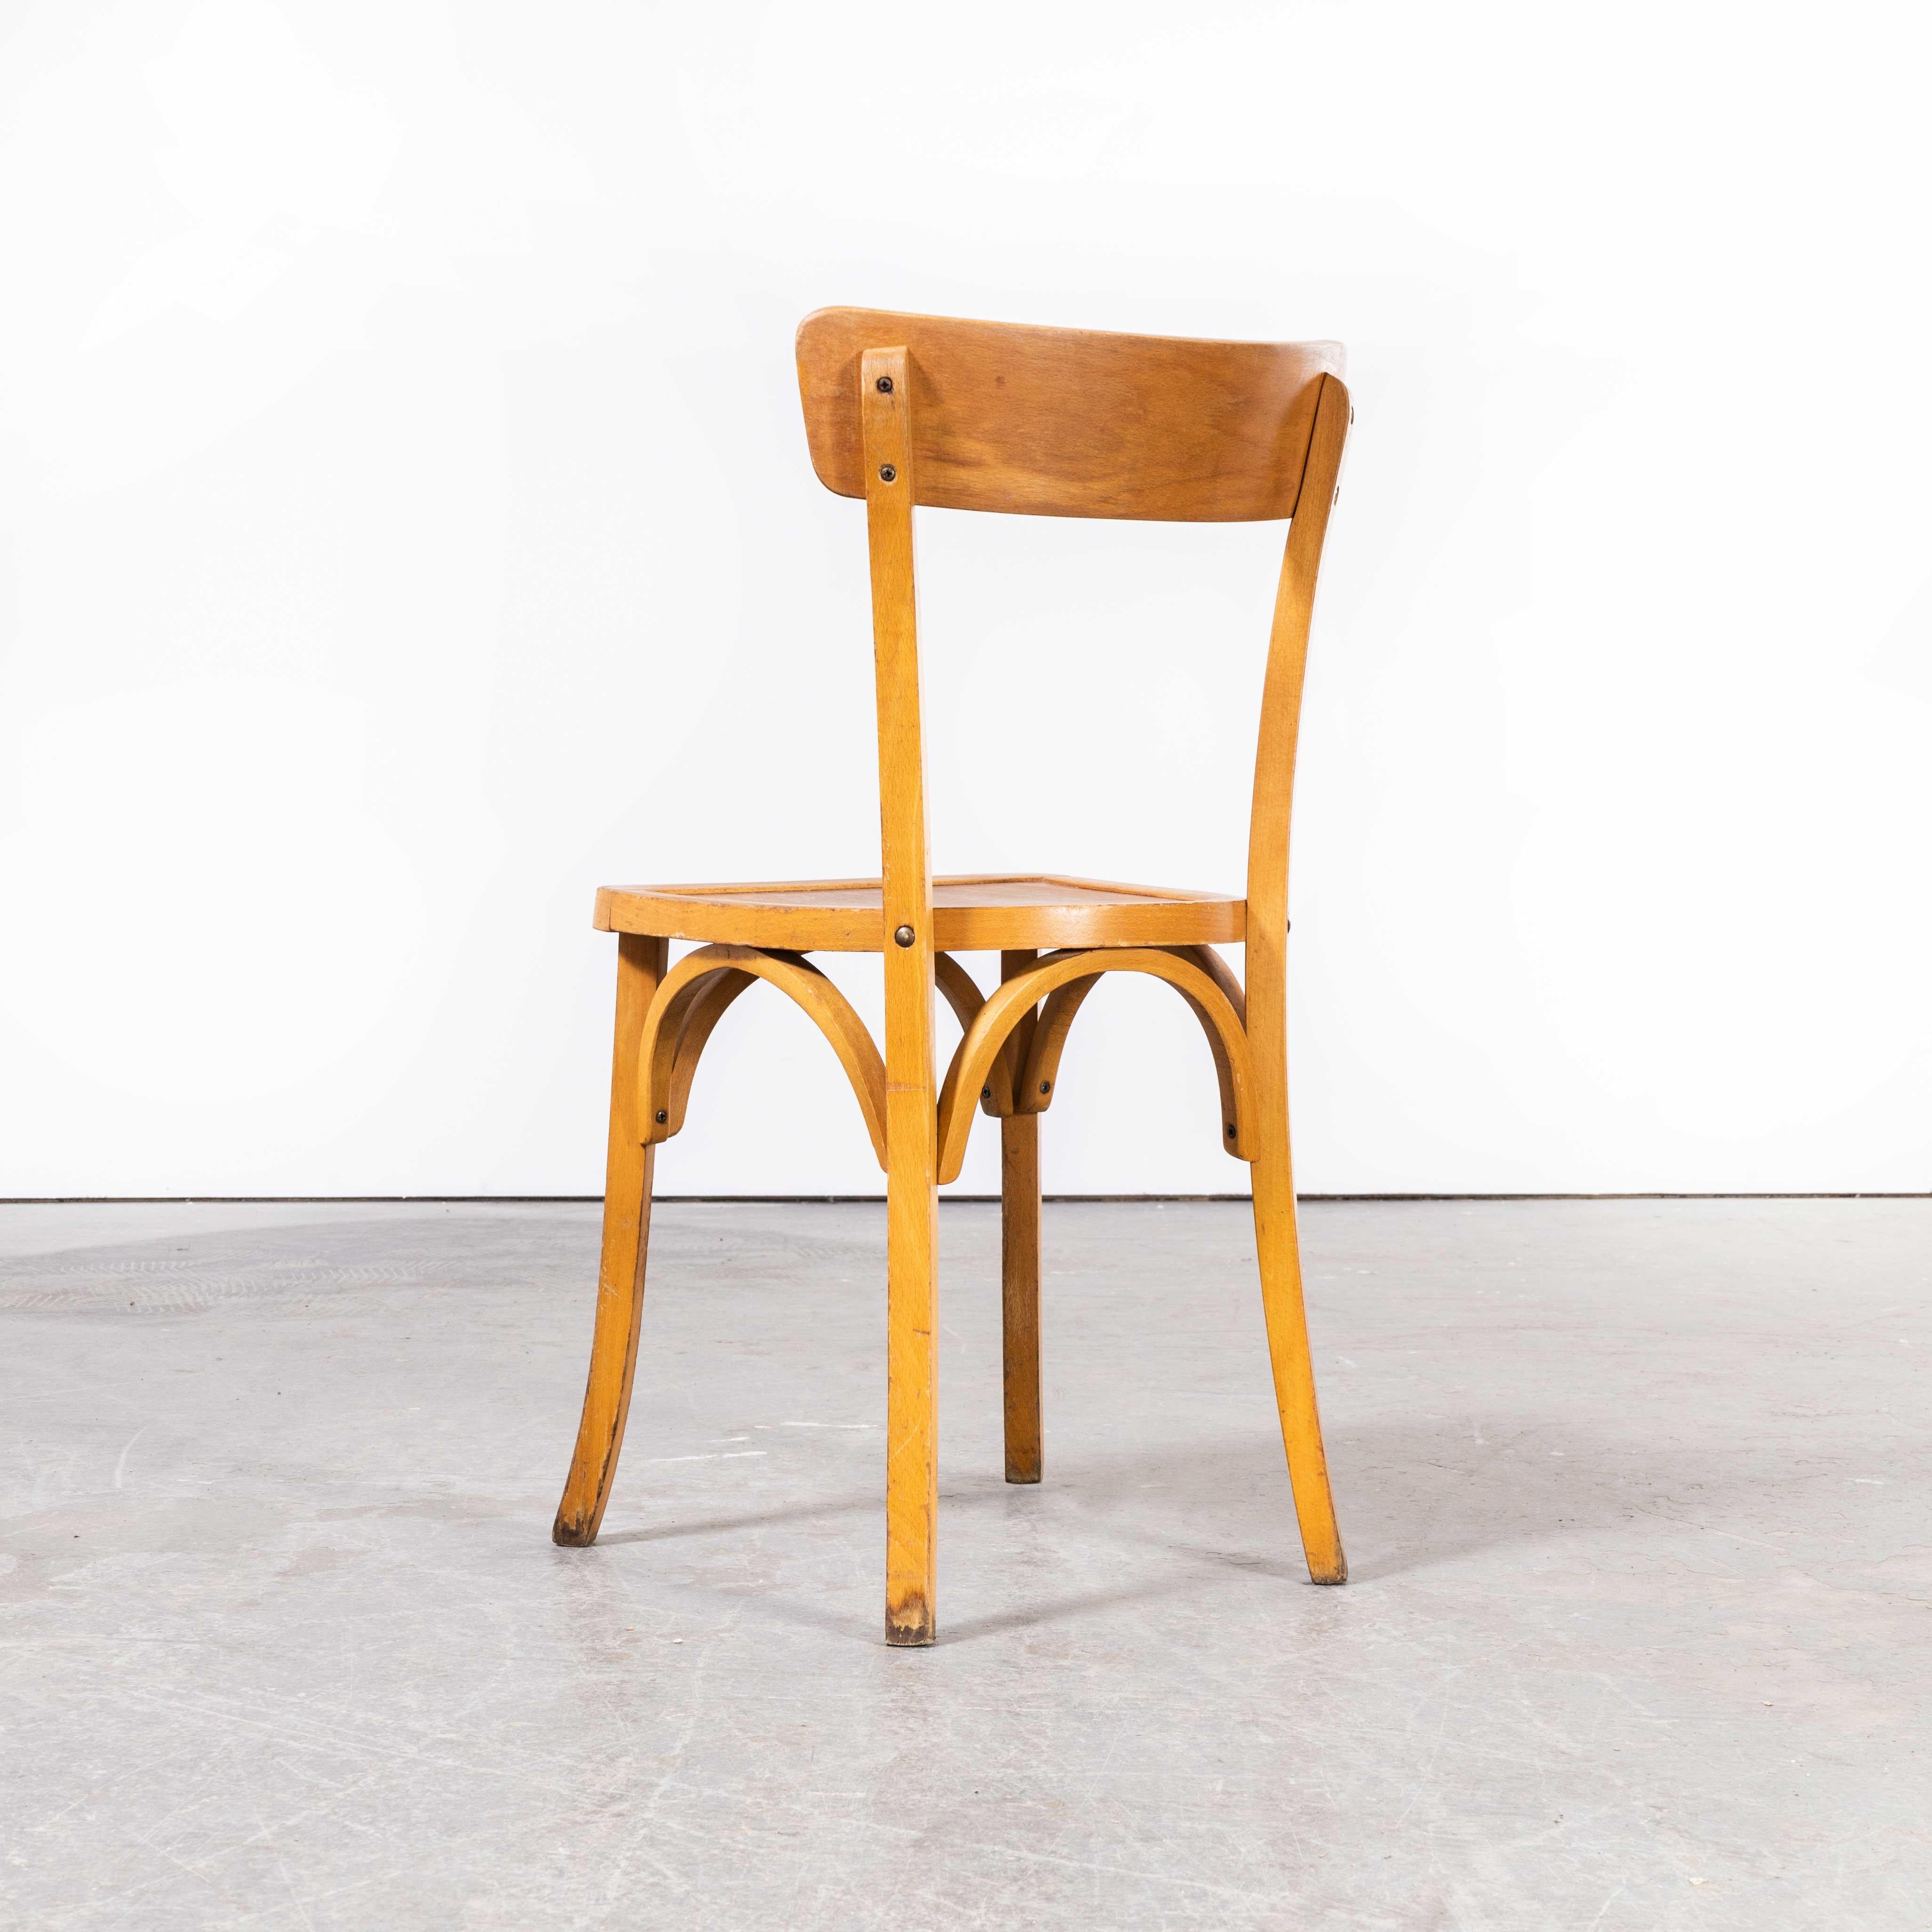 1950’s French Baumann Blonde Kick leg bentwood dining chairs – set of four
1950’s French Baumann Blonde Kick leg bentwood dining chairs – set of four. Baumann is a slightly off the radar French producer just starting to gain traction in the market.